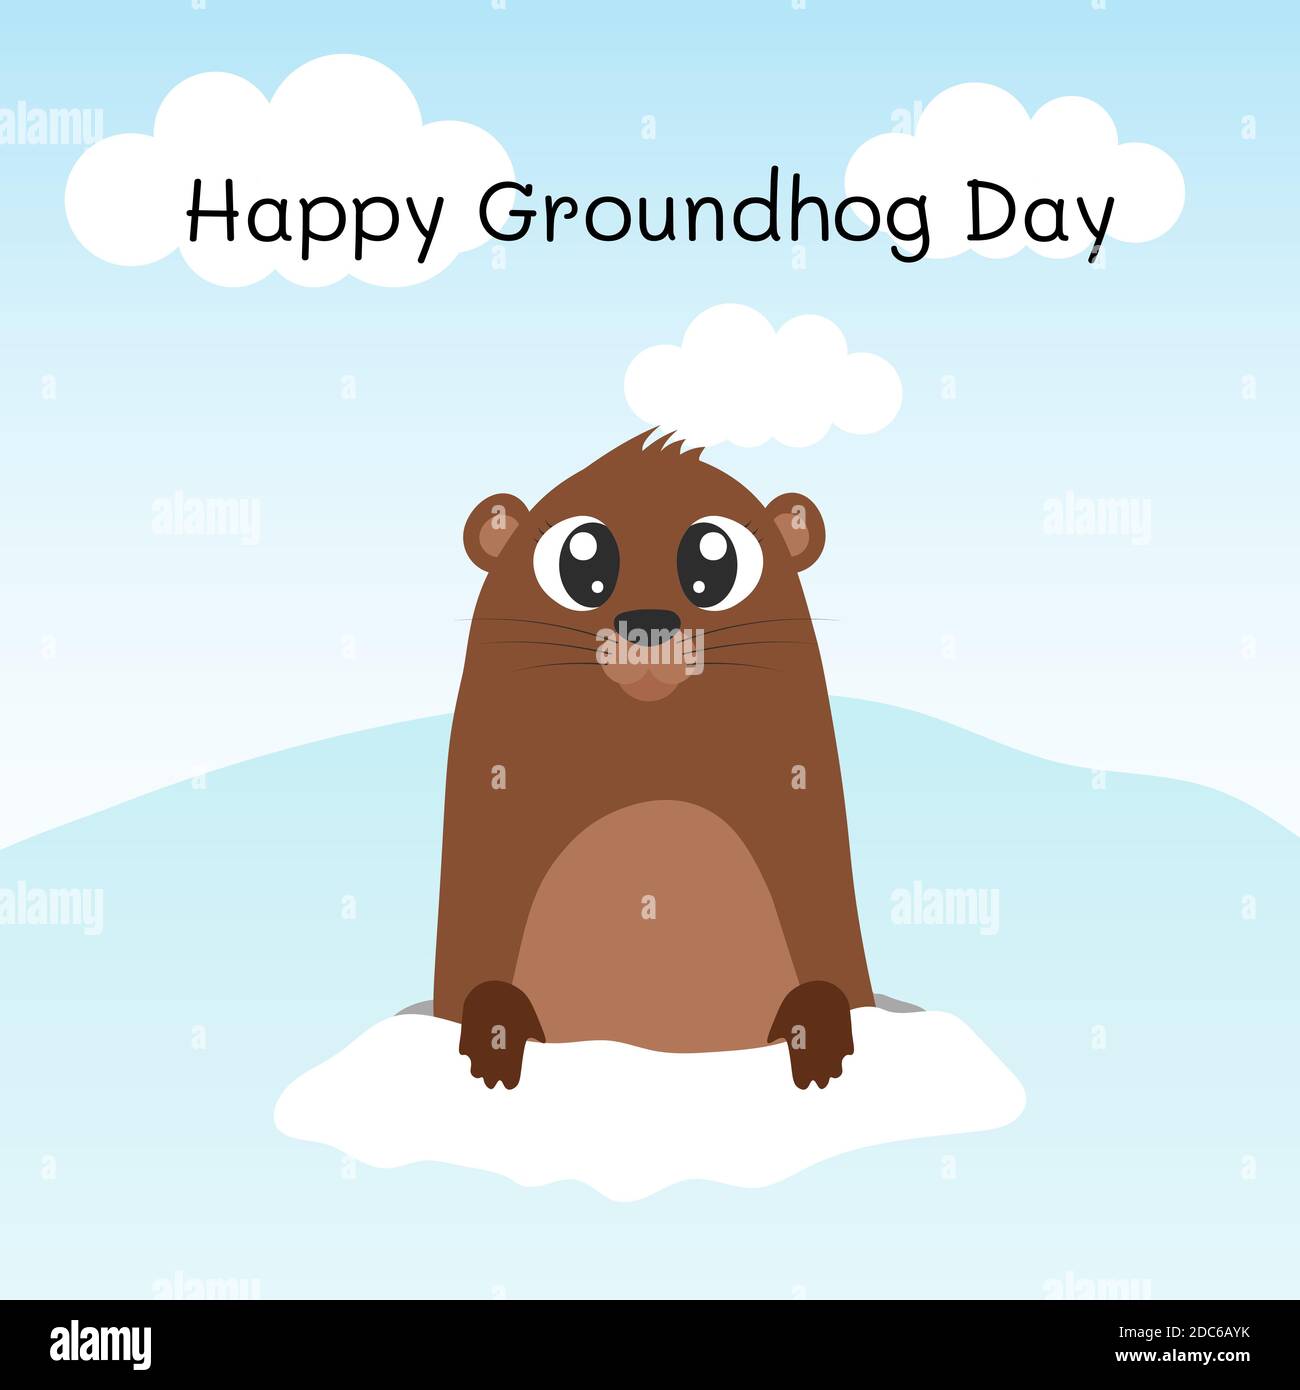 Happy groundhog day. Groundhog coming out of its burrow. Vector cartoon illustration. Groundhog character. Isolated object. Stock Vector